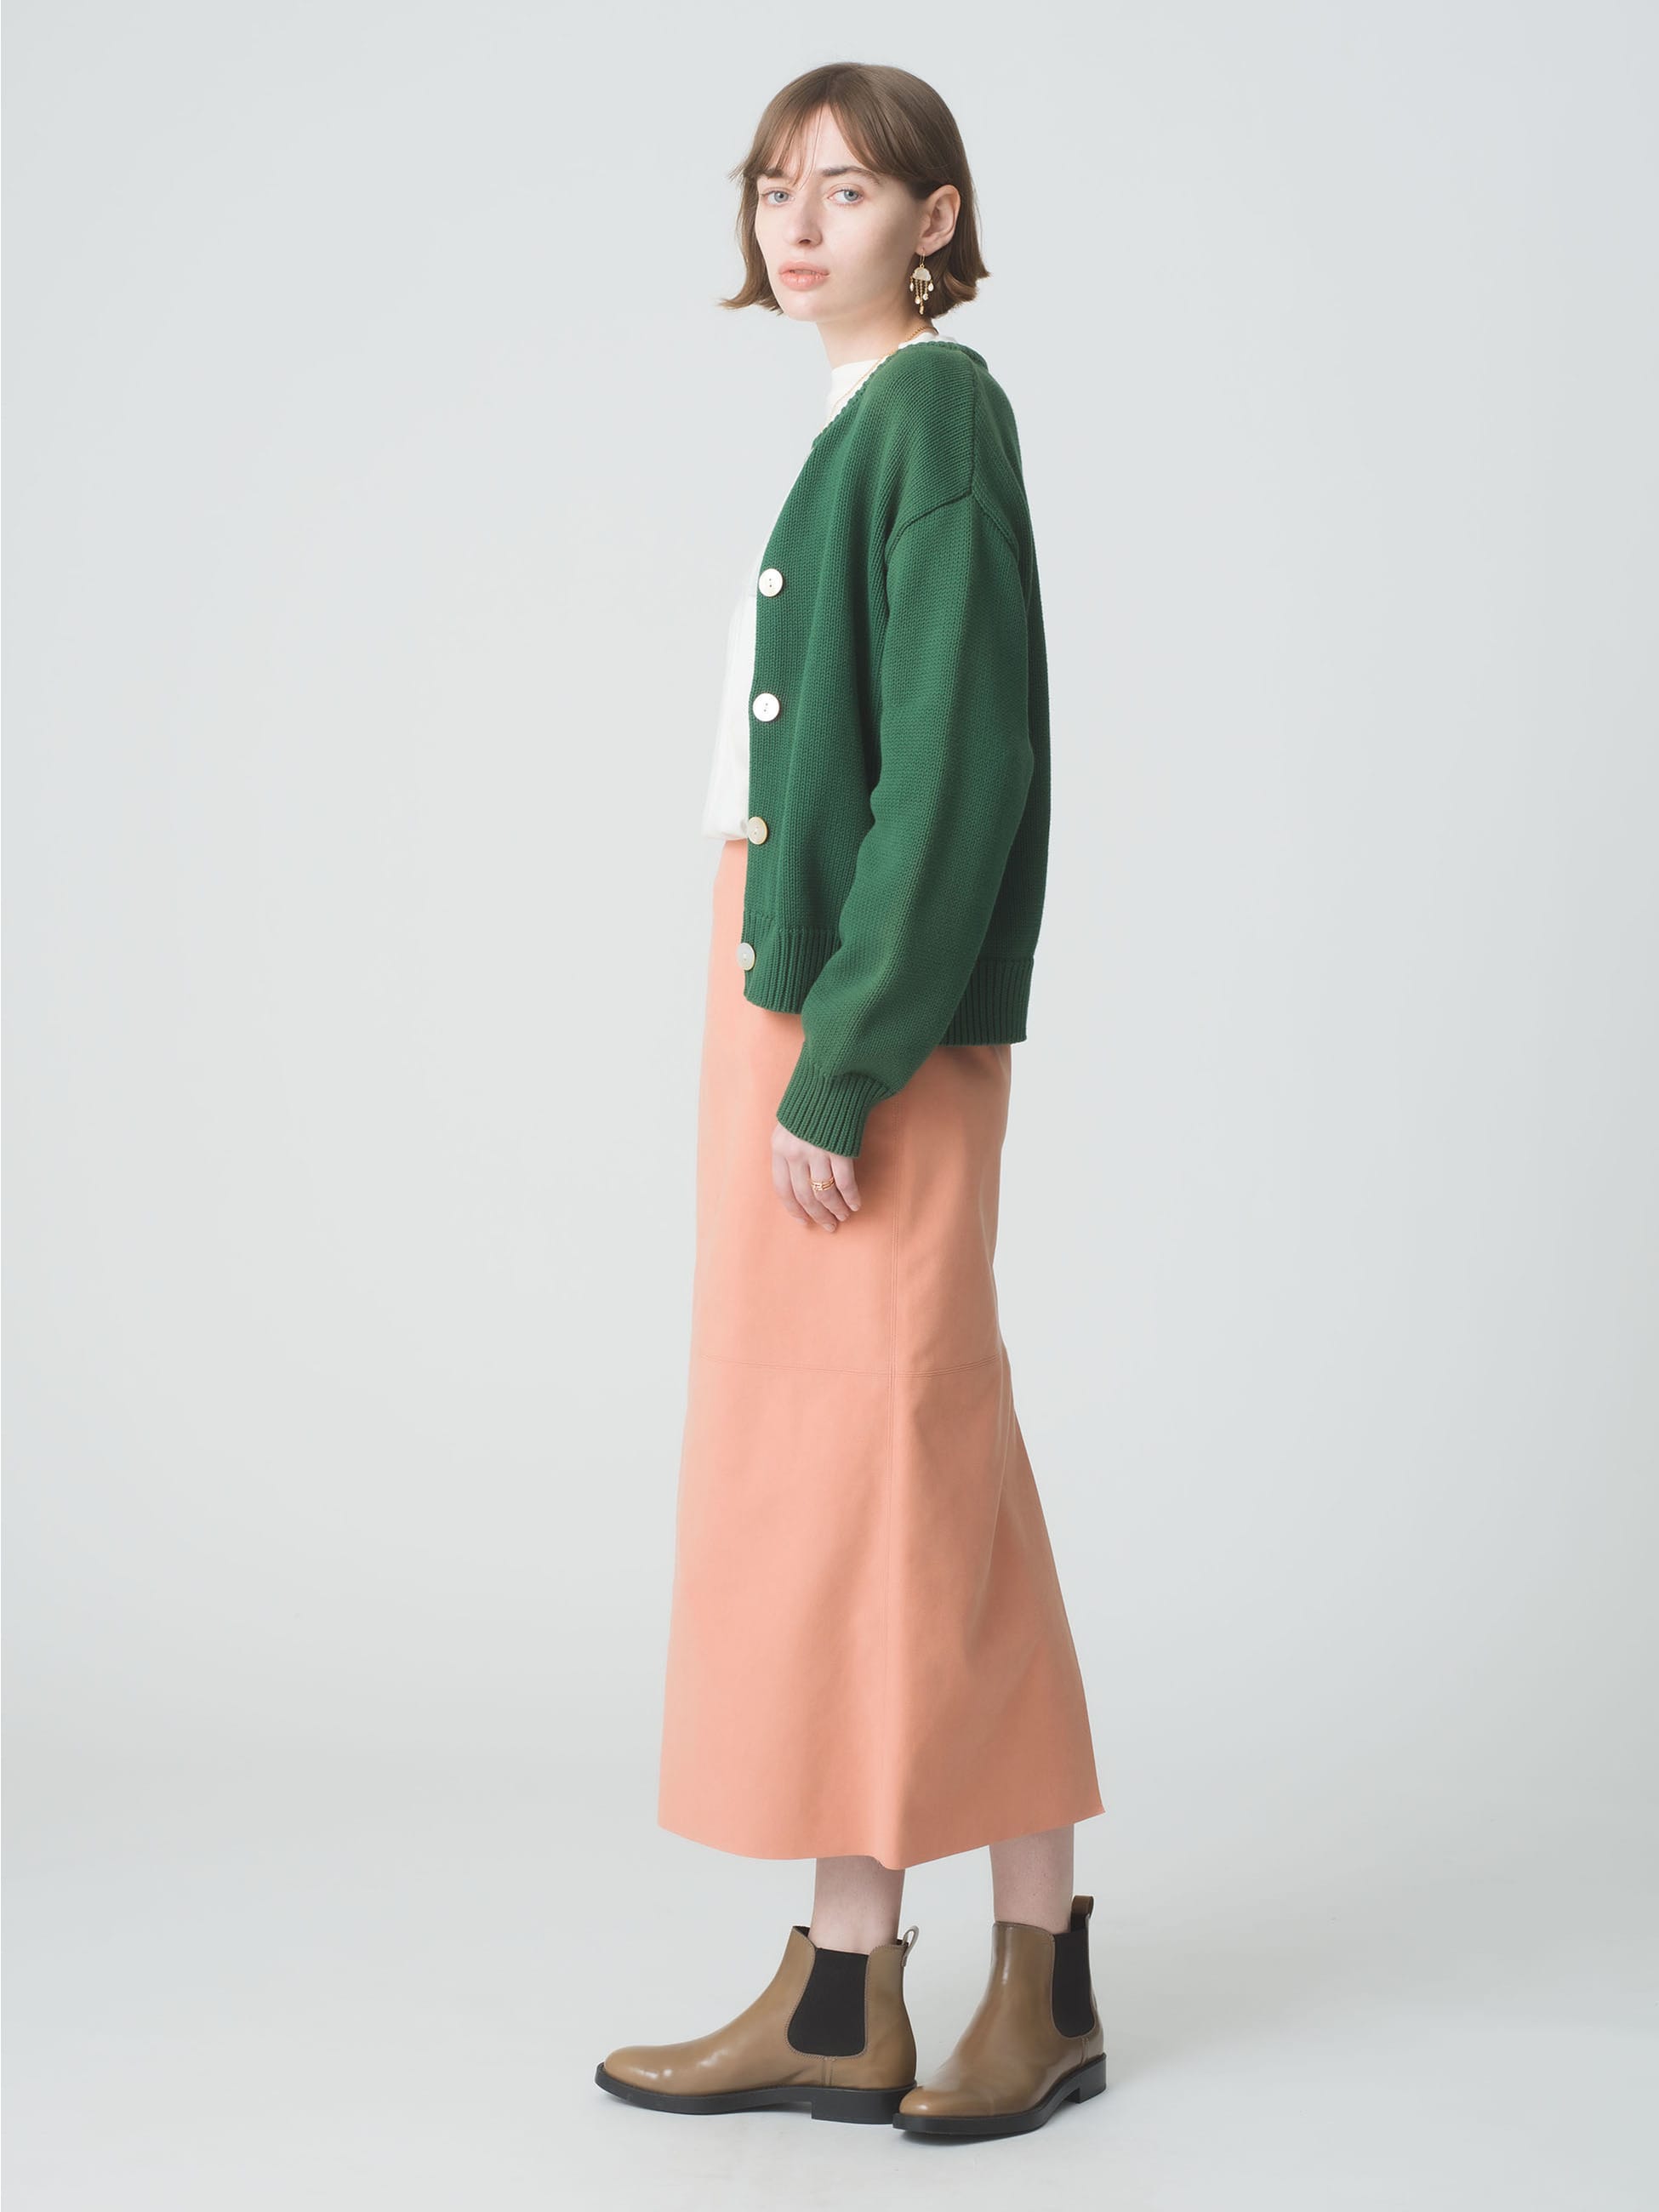 Faux Leather Skirt｜Ron Herman(ロンハーマン)｜Ron Herman